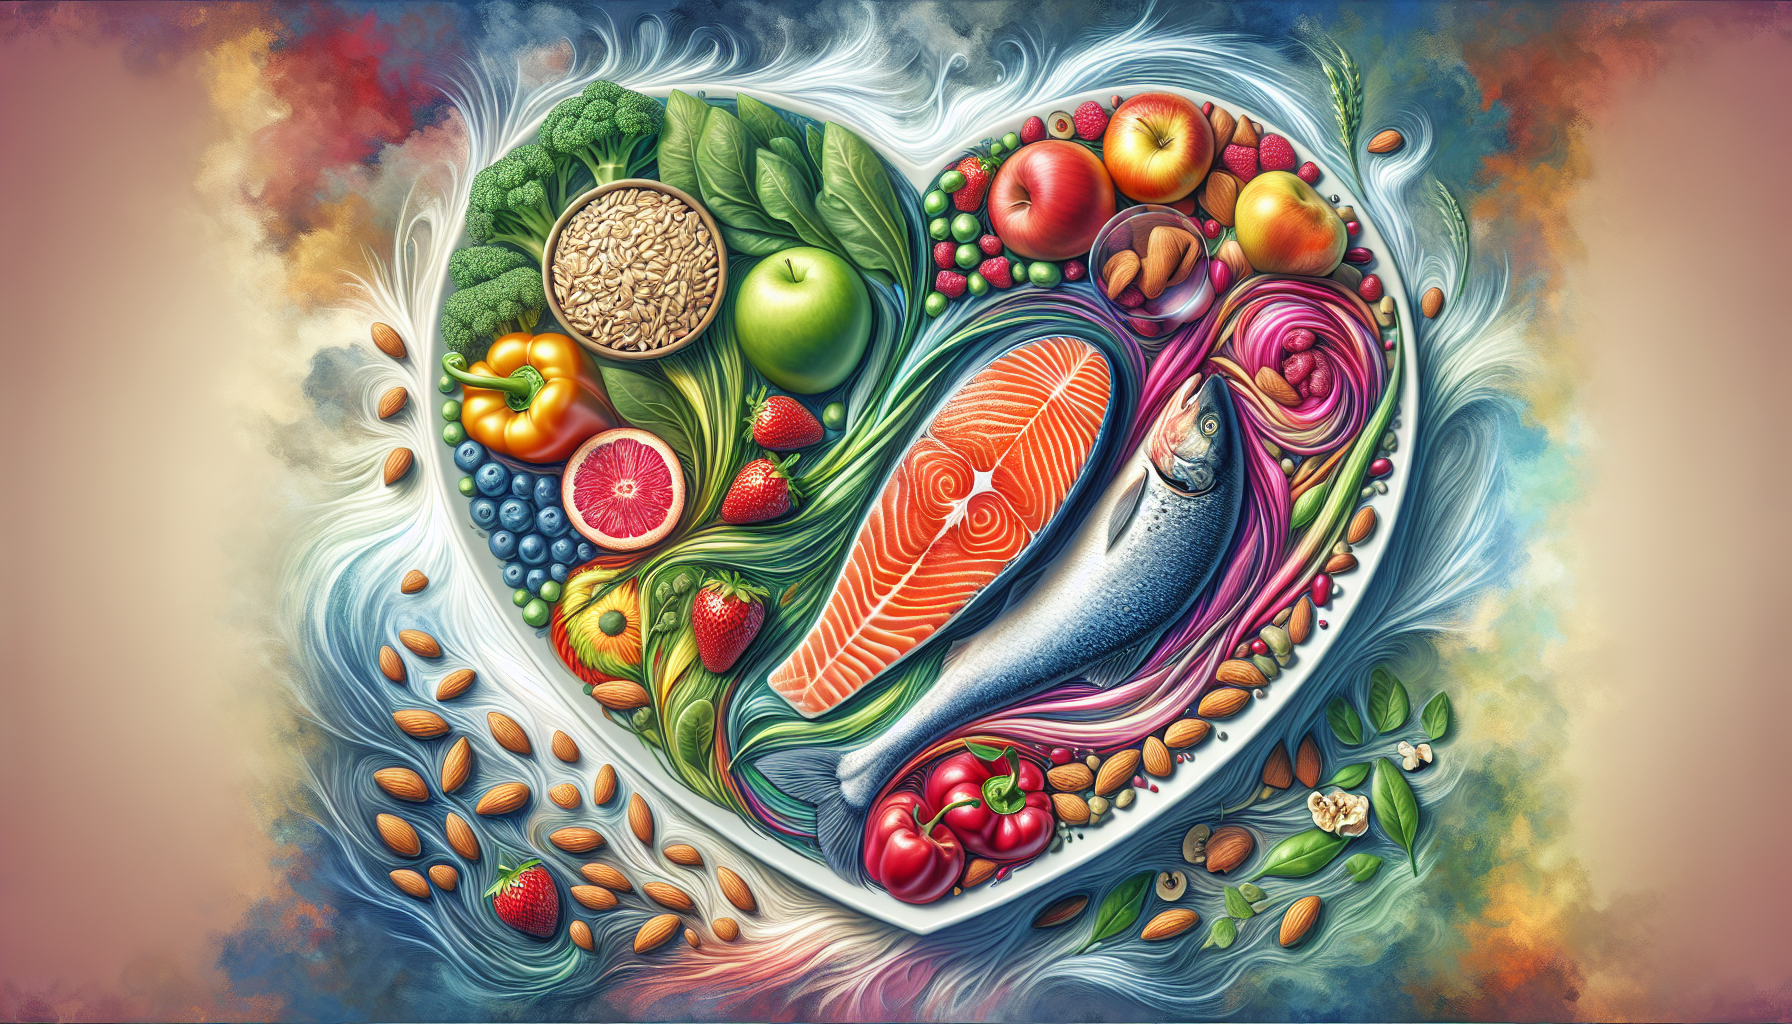 Artistic depiction of a healthy diet for vascular arms